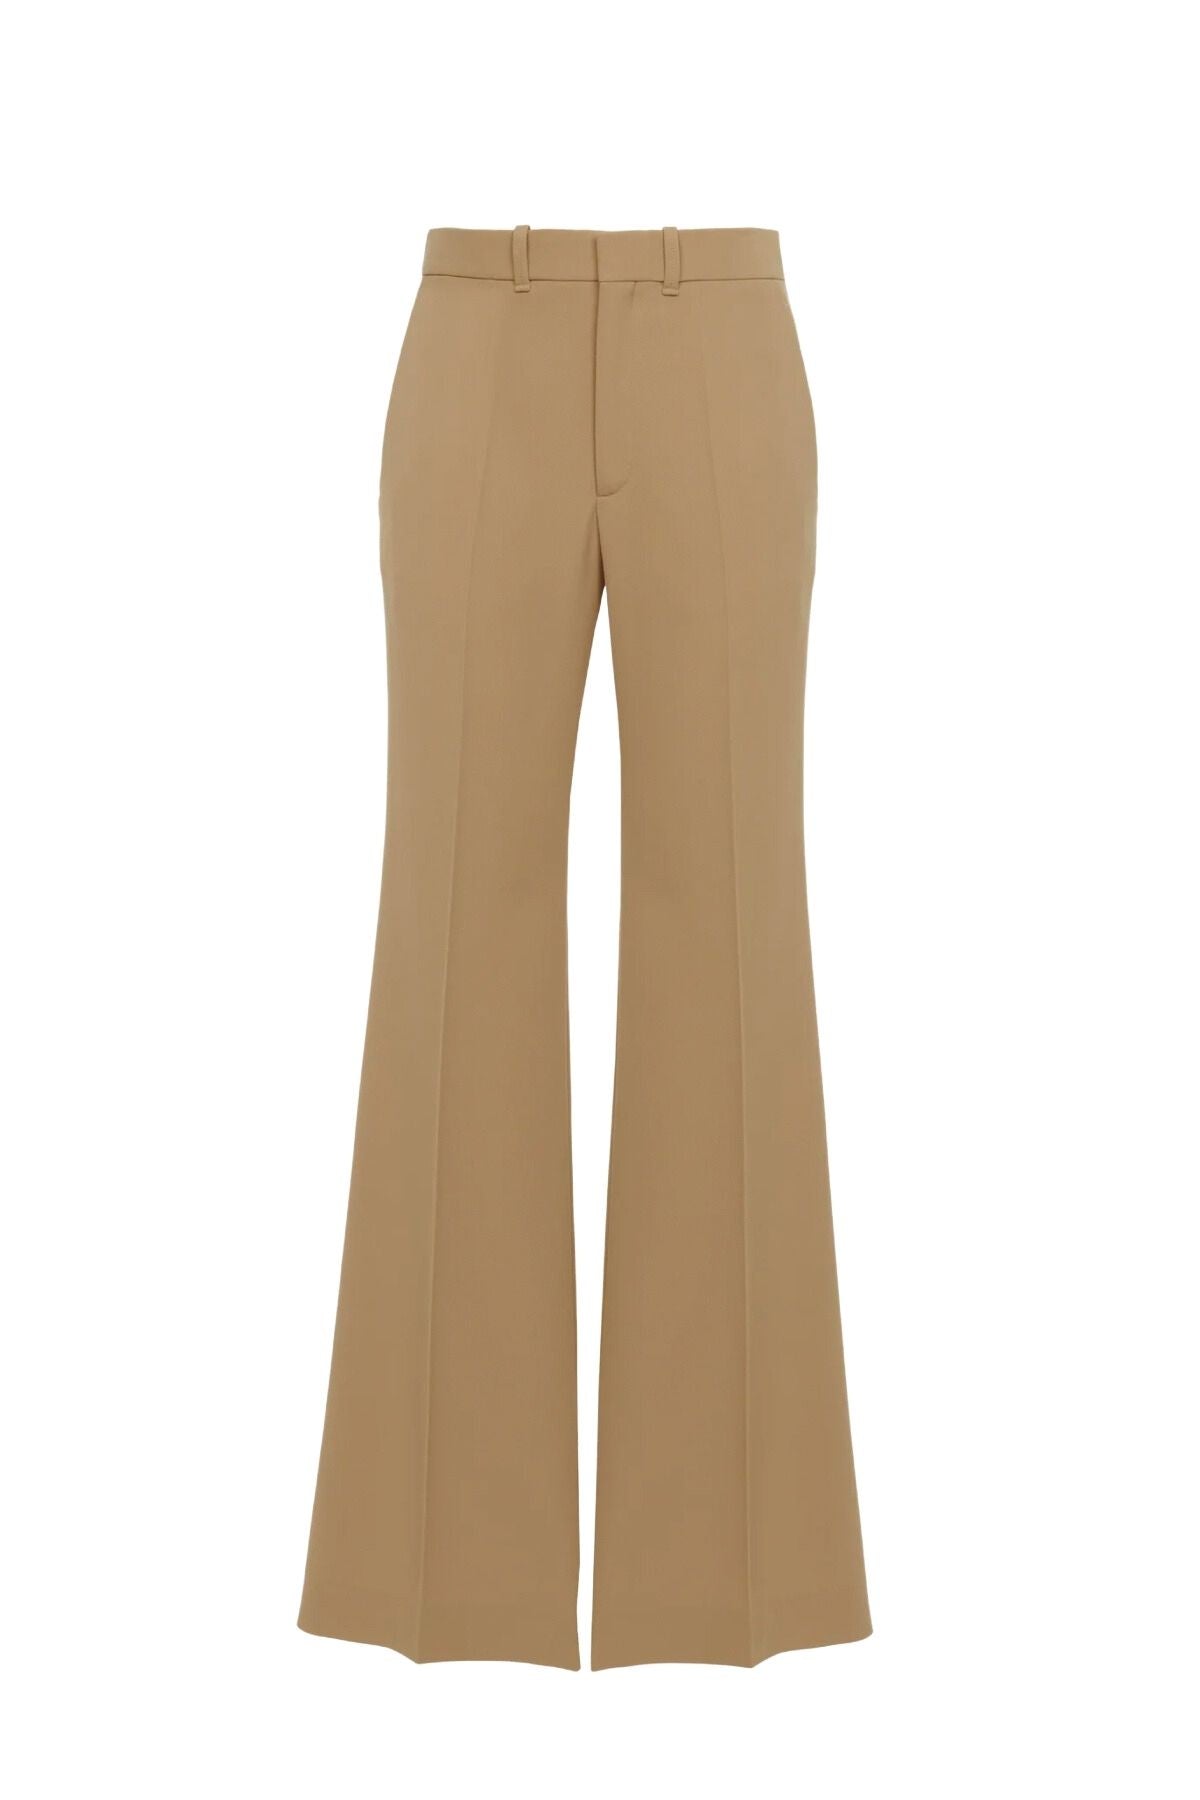 Chloé Tailored Wool Trousers - Pearl Beige